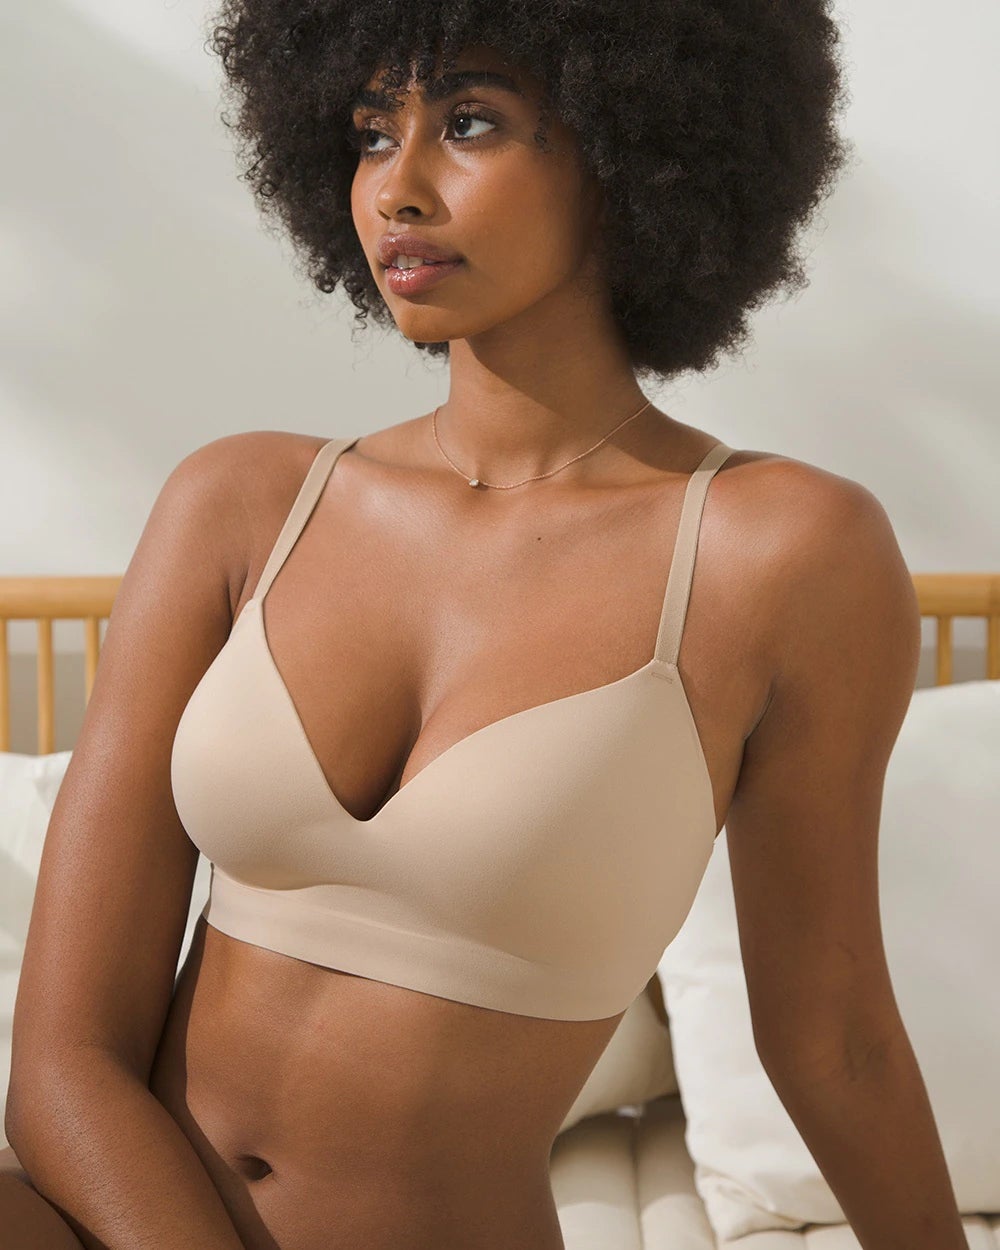 Sweat-proof bra launches to banish underboob perspiration for summer